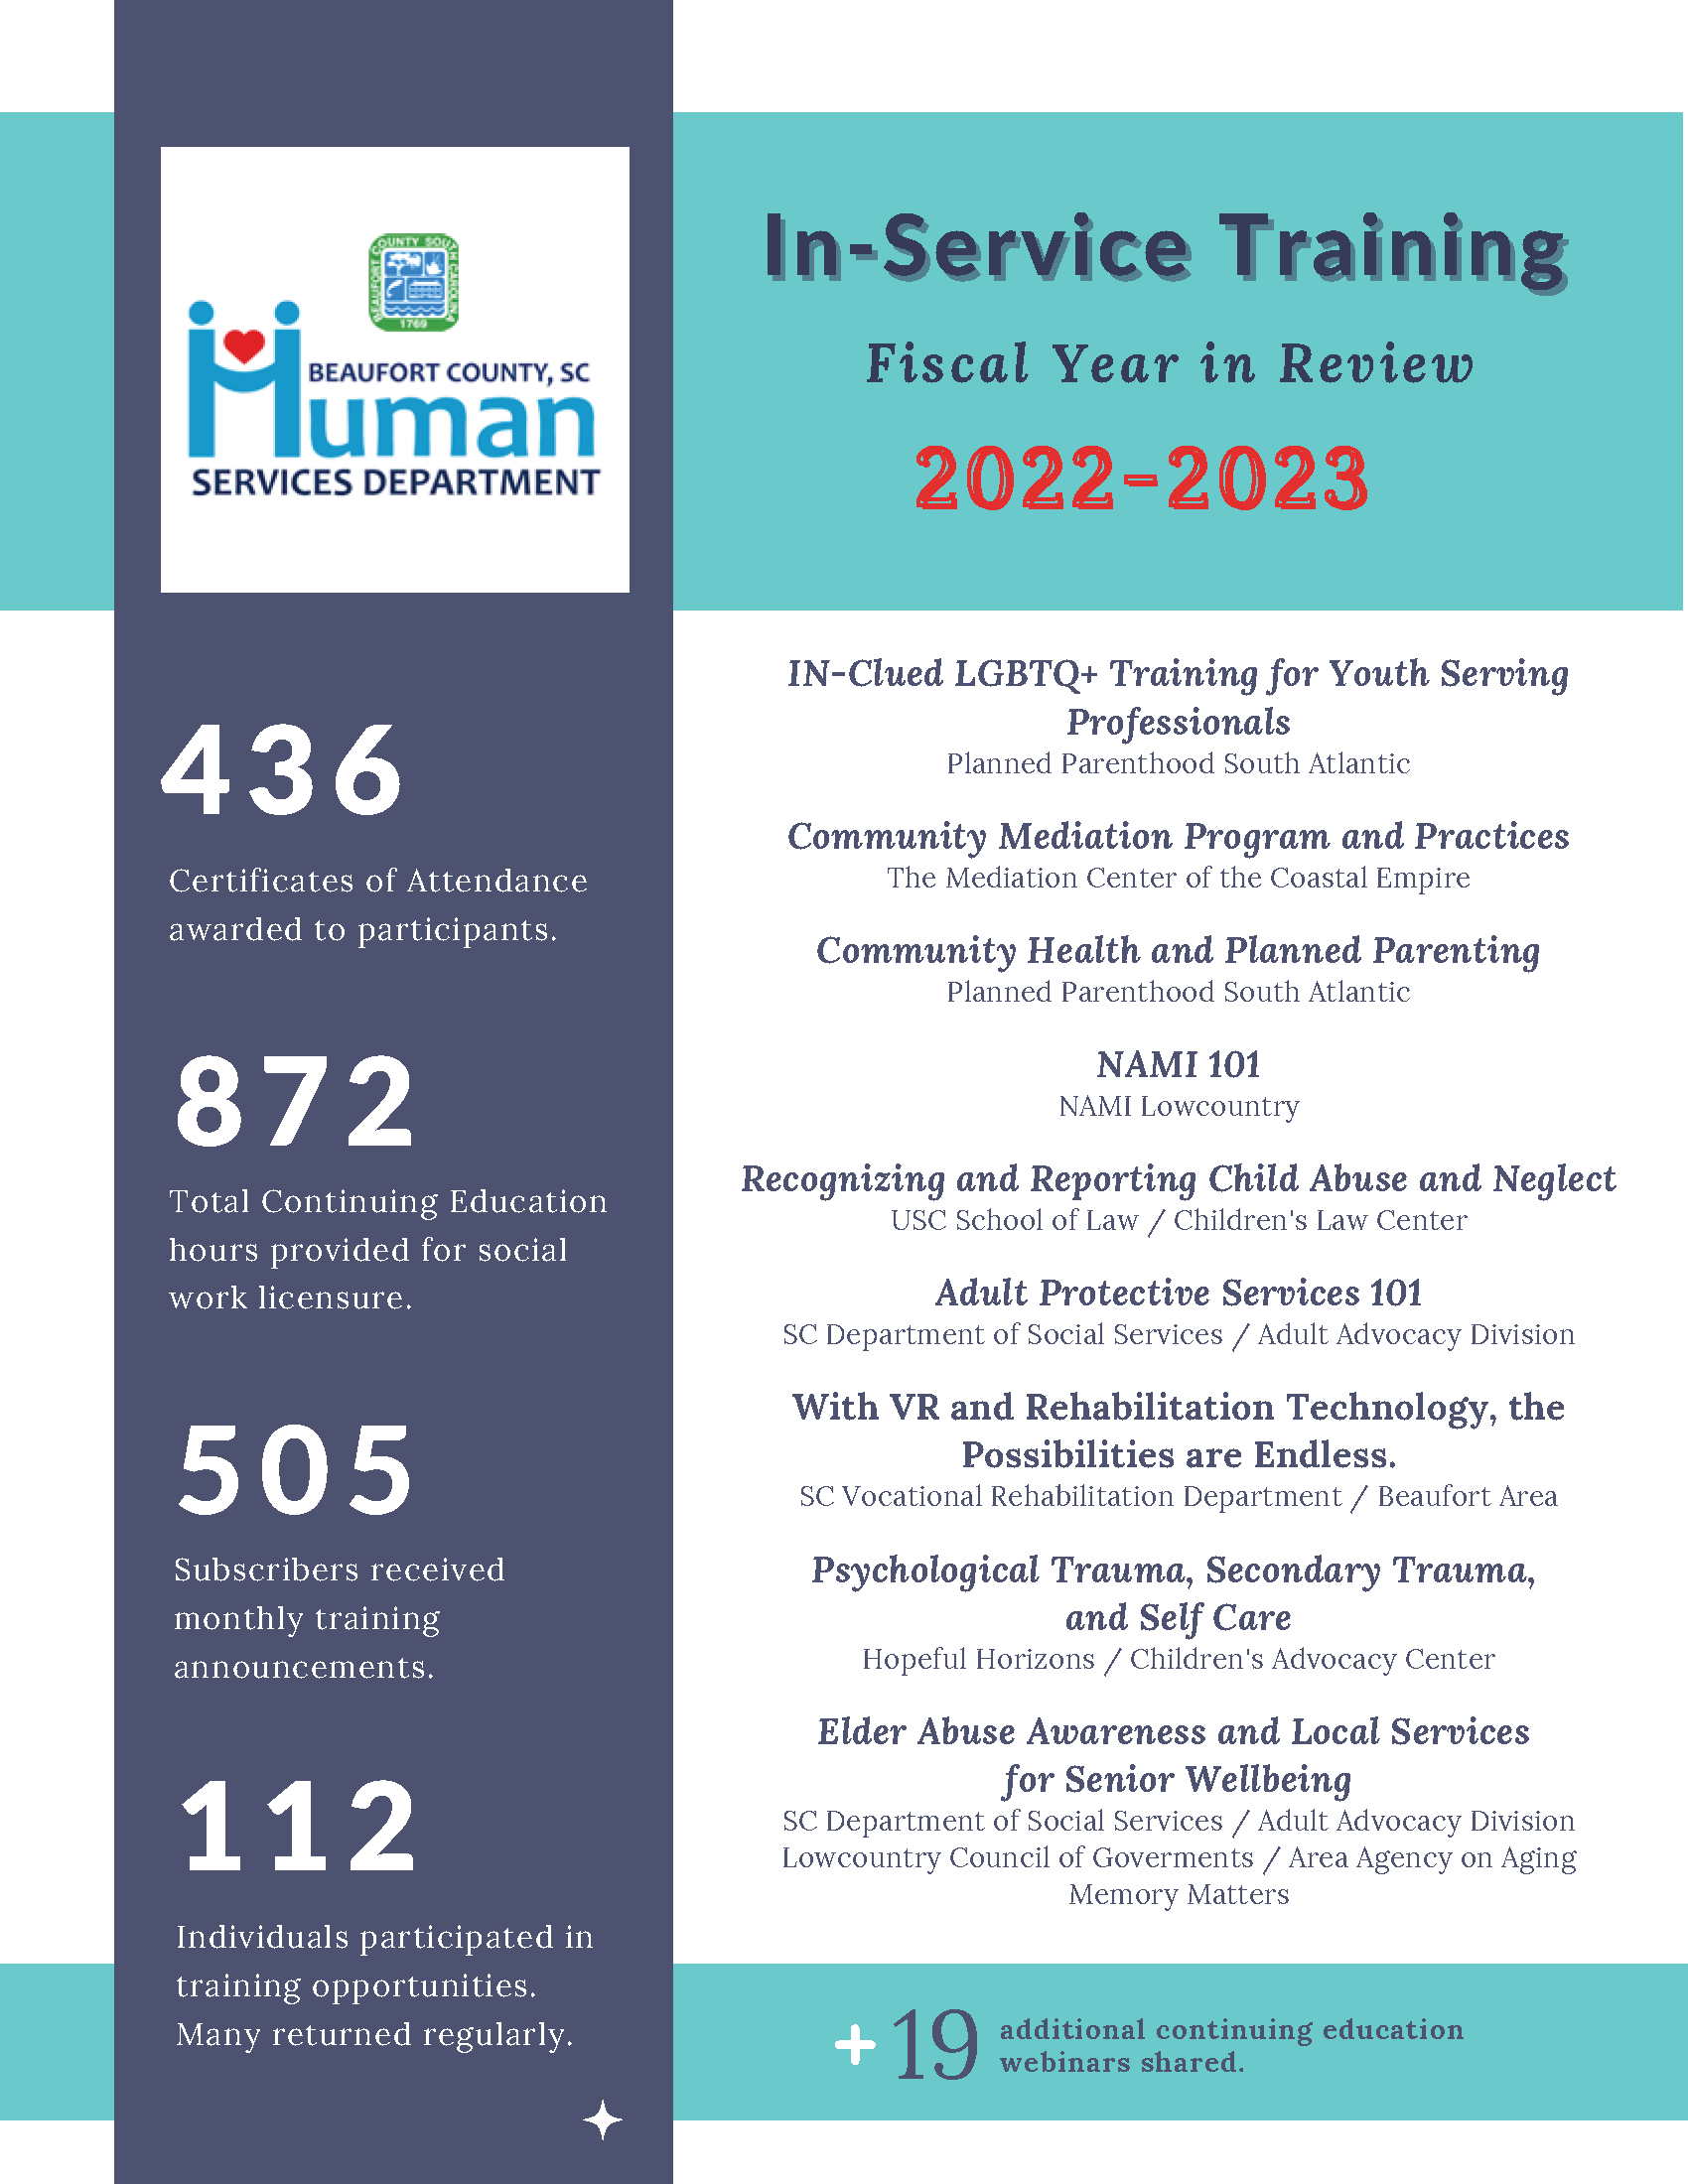 FY22-23-In-service-Training-Review.png